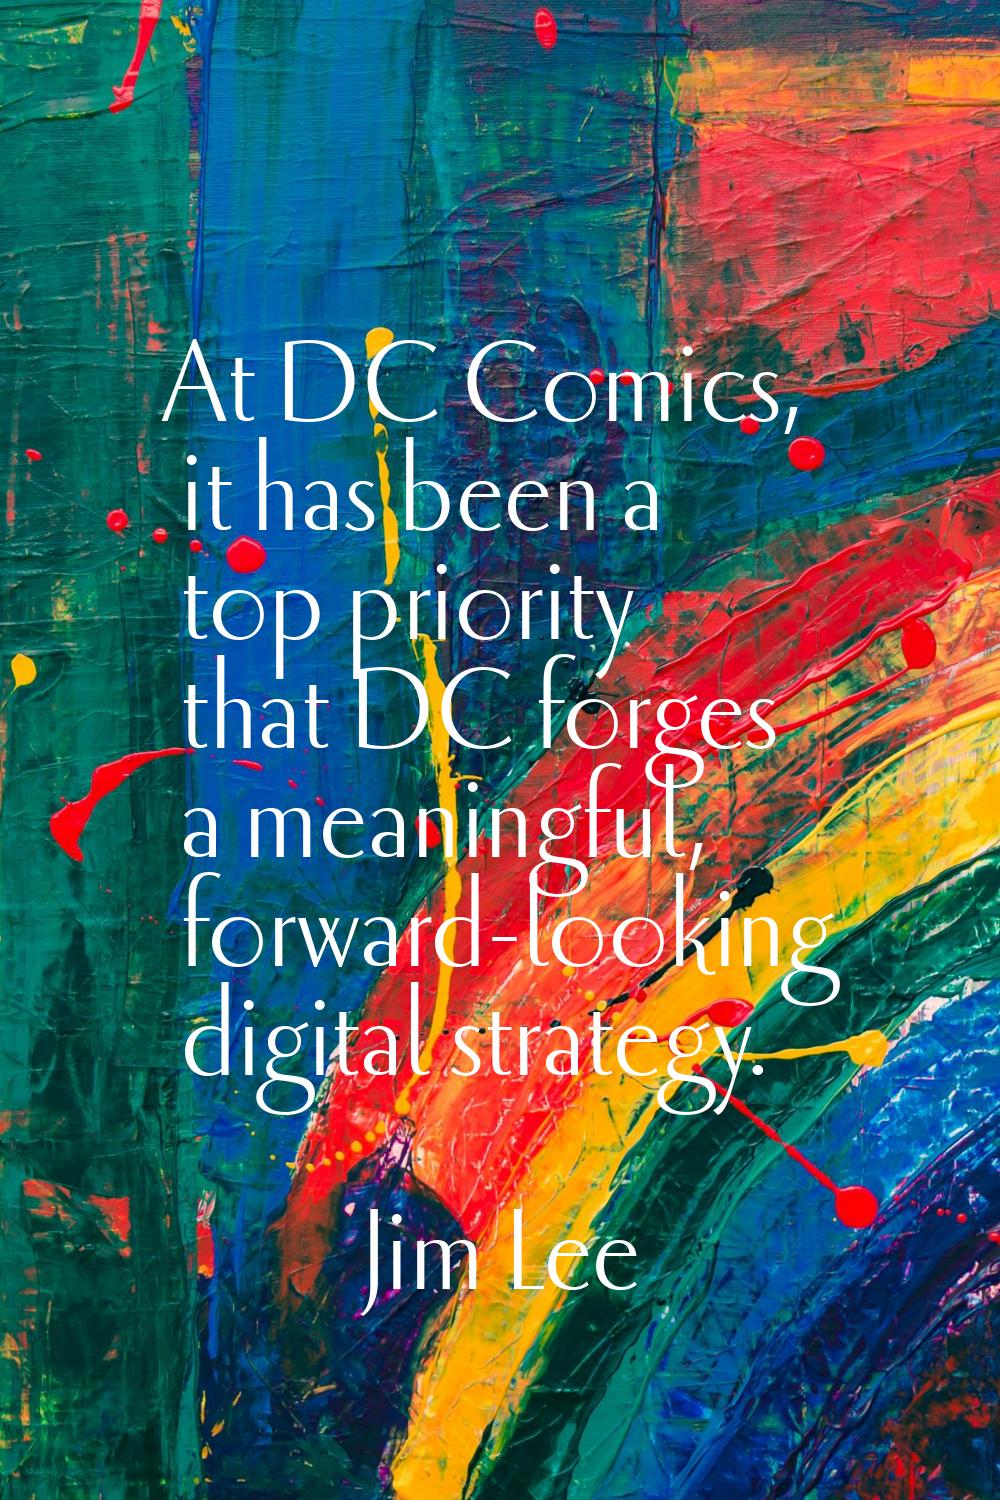 At DC Comics, it has been a top priority that DC forges a meaningful, forward-looking digital strat